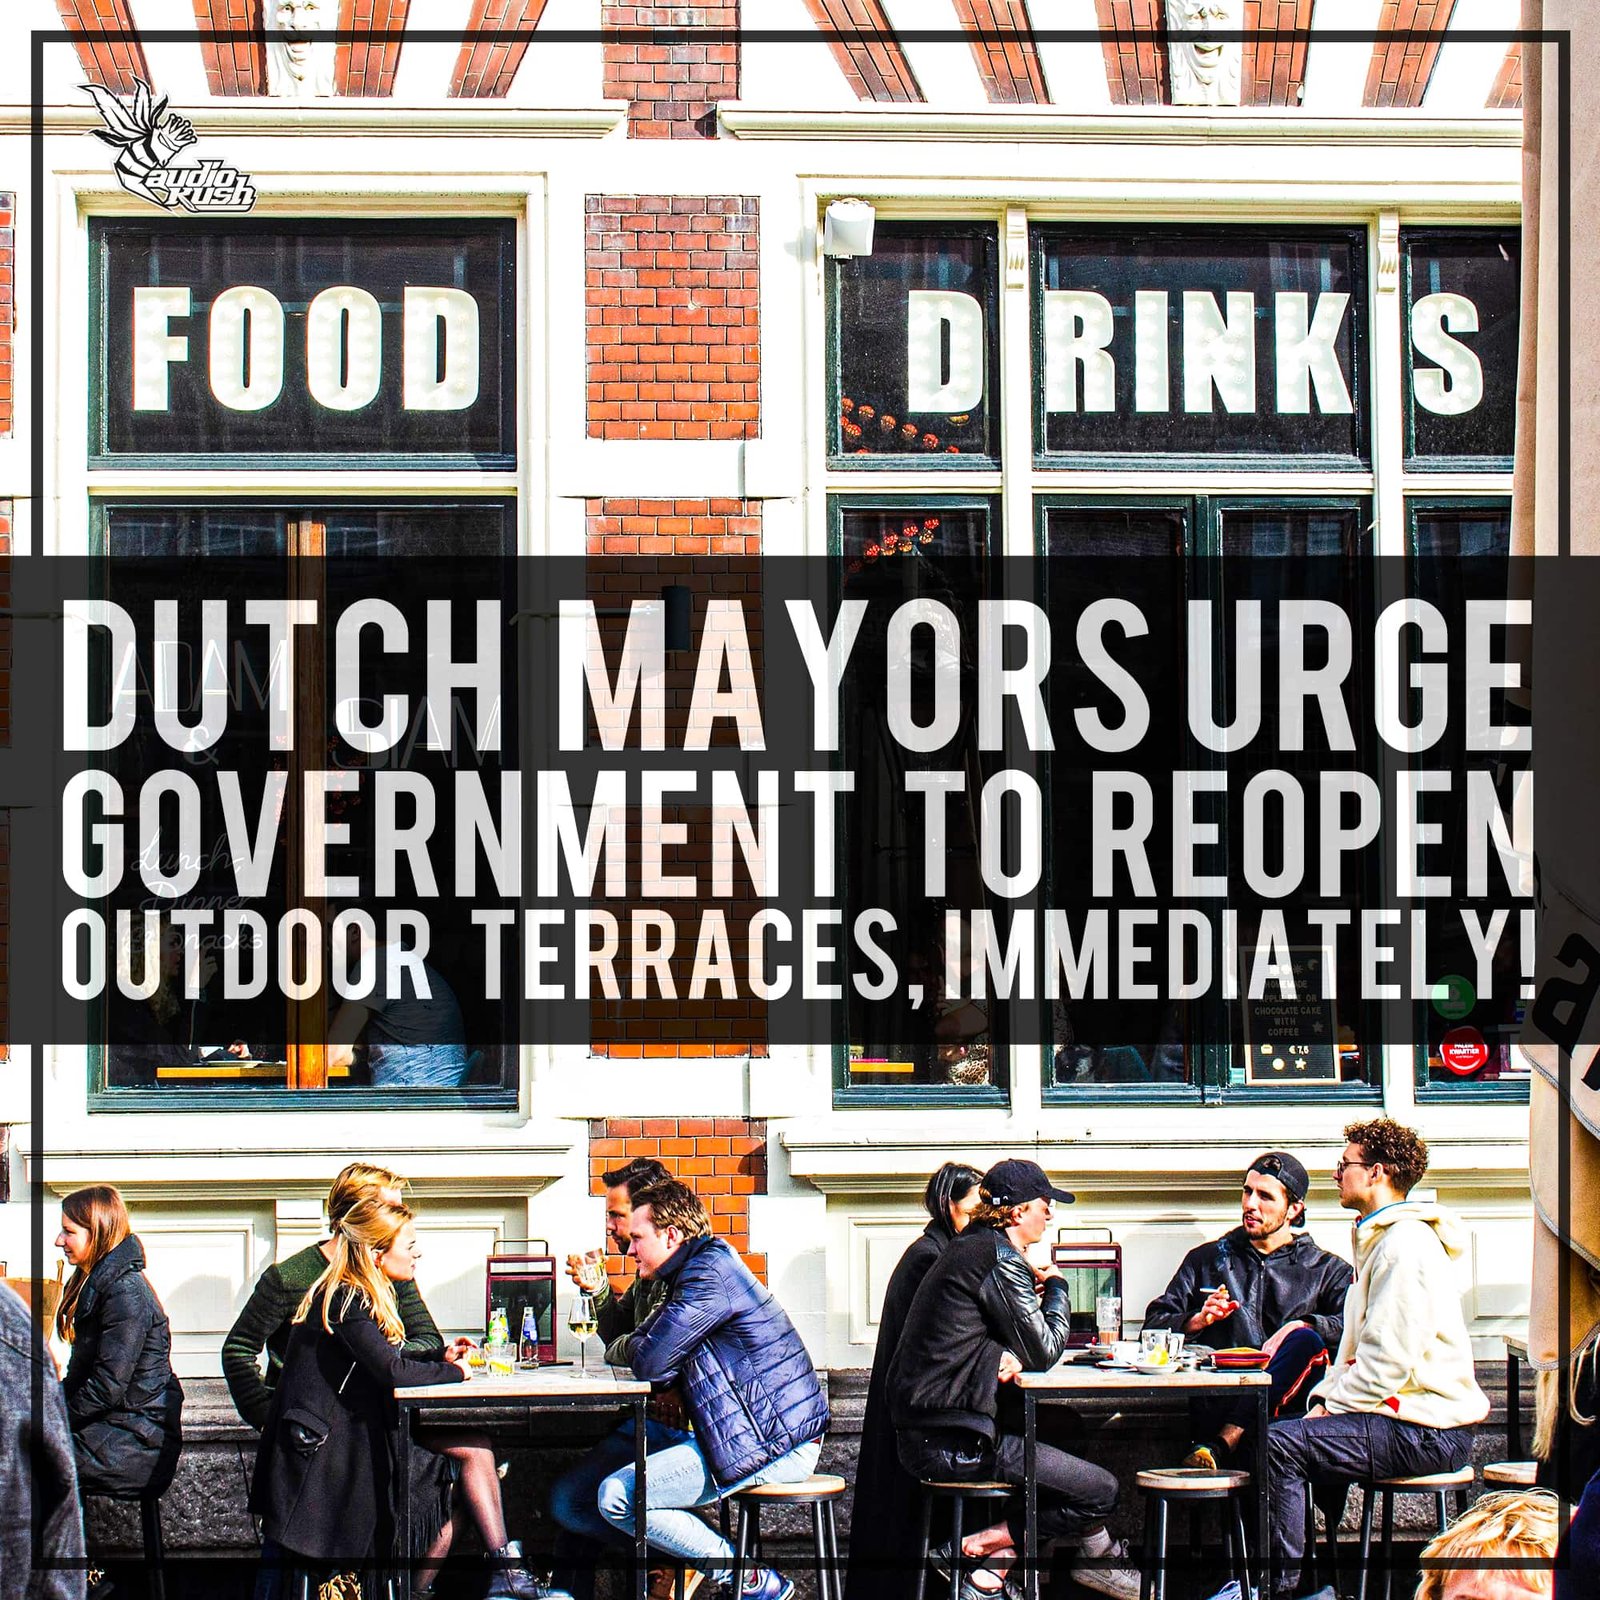 Dutch mayors urge government to reopen outdoor terraces immediately. 